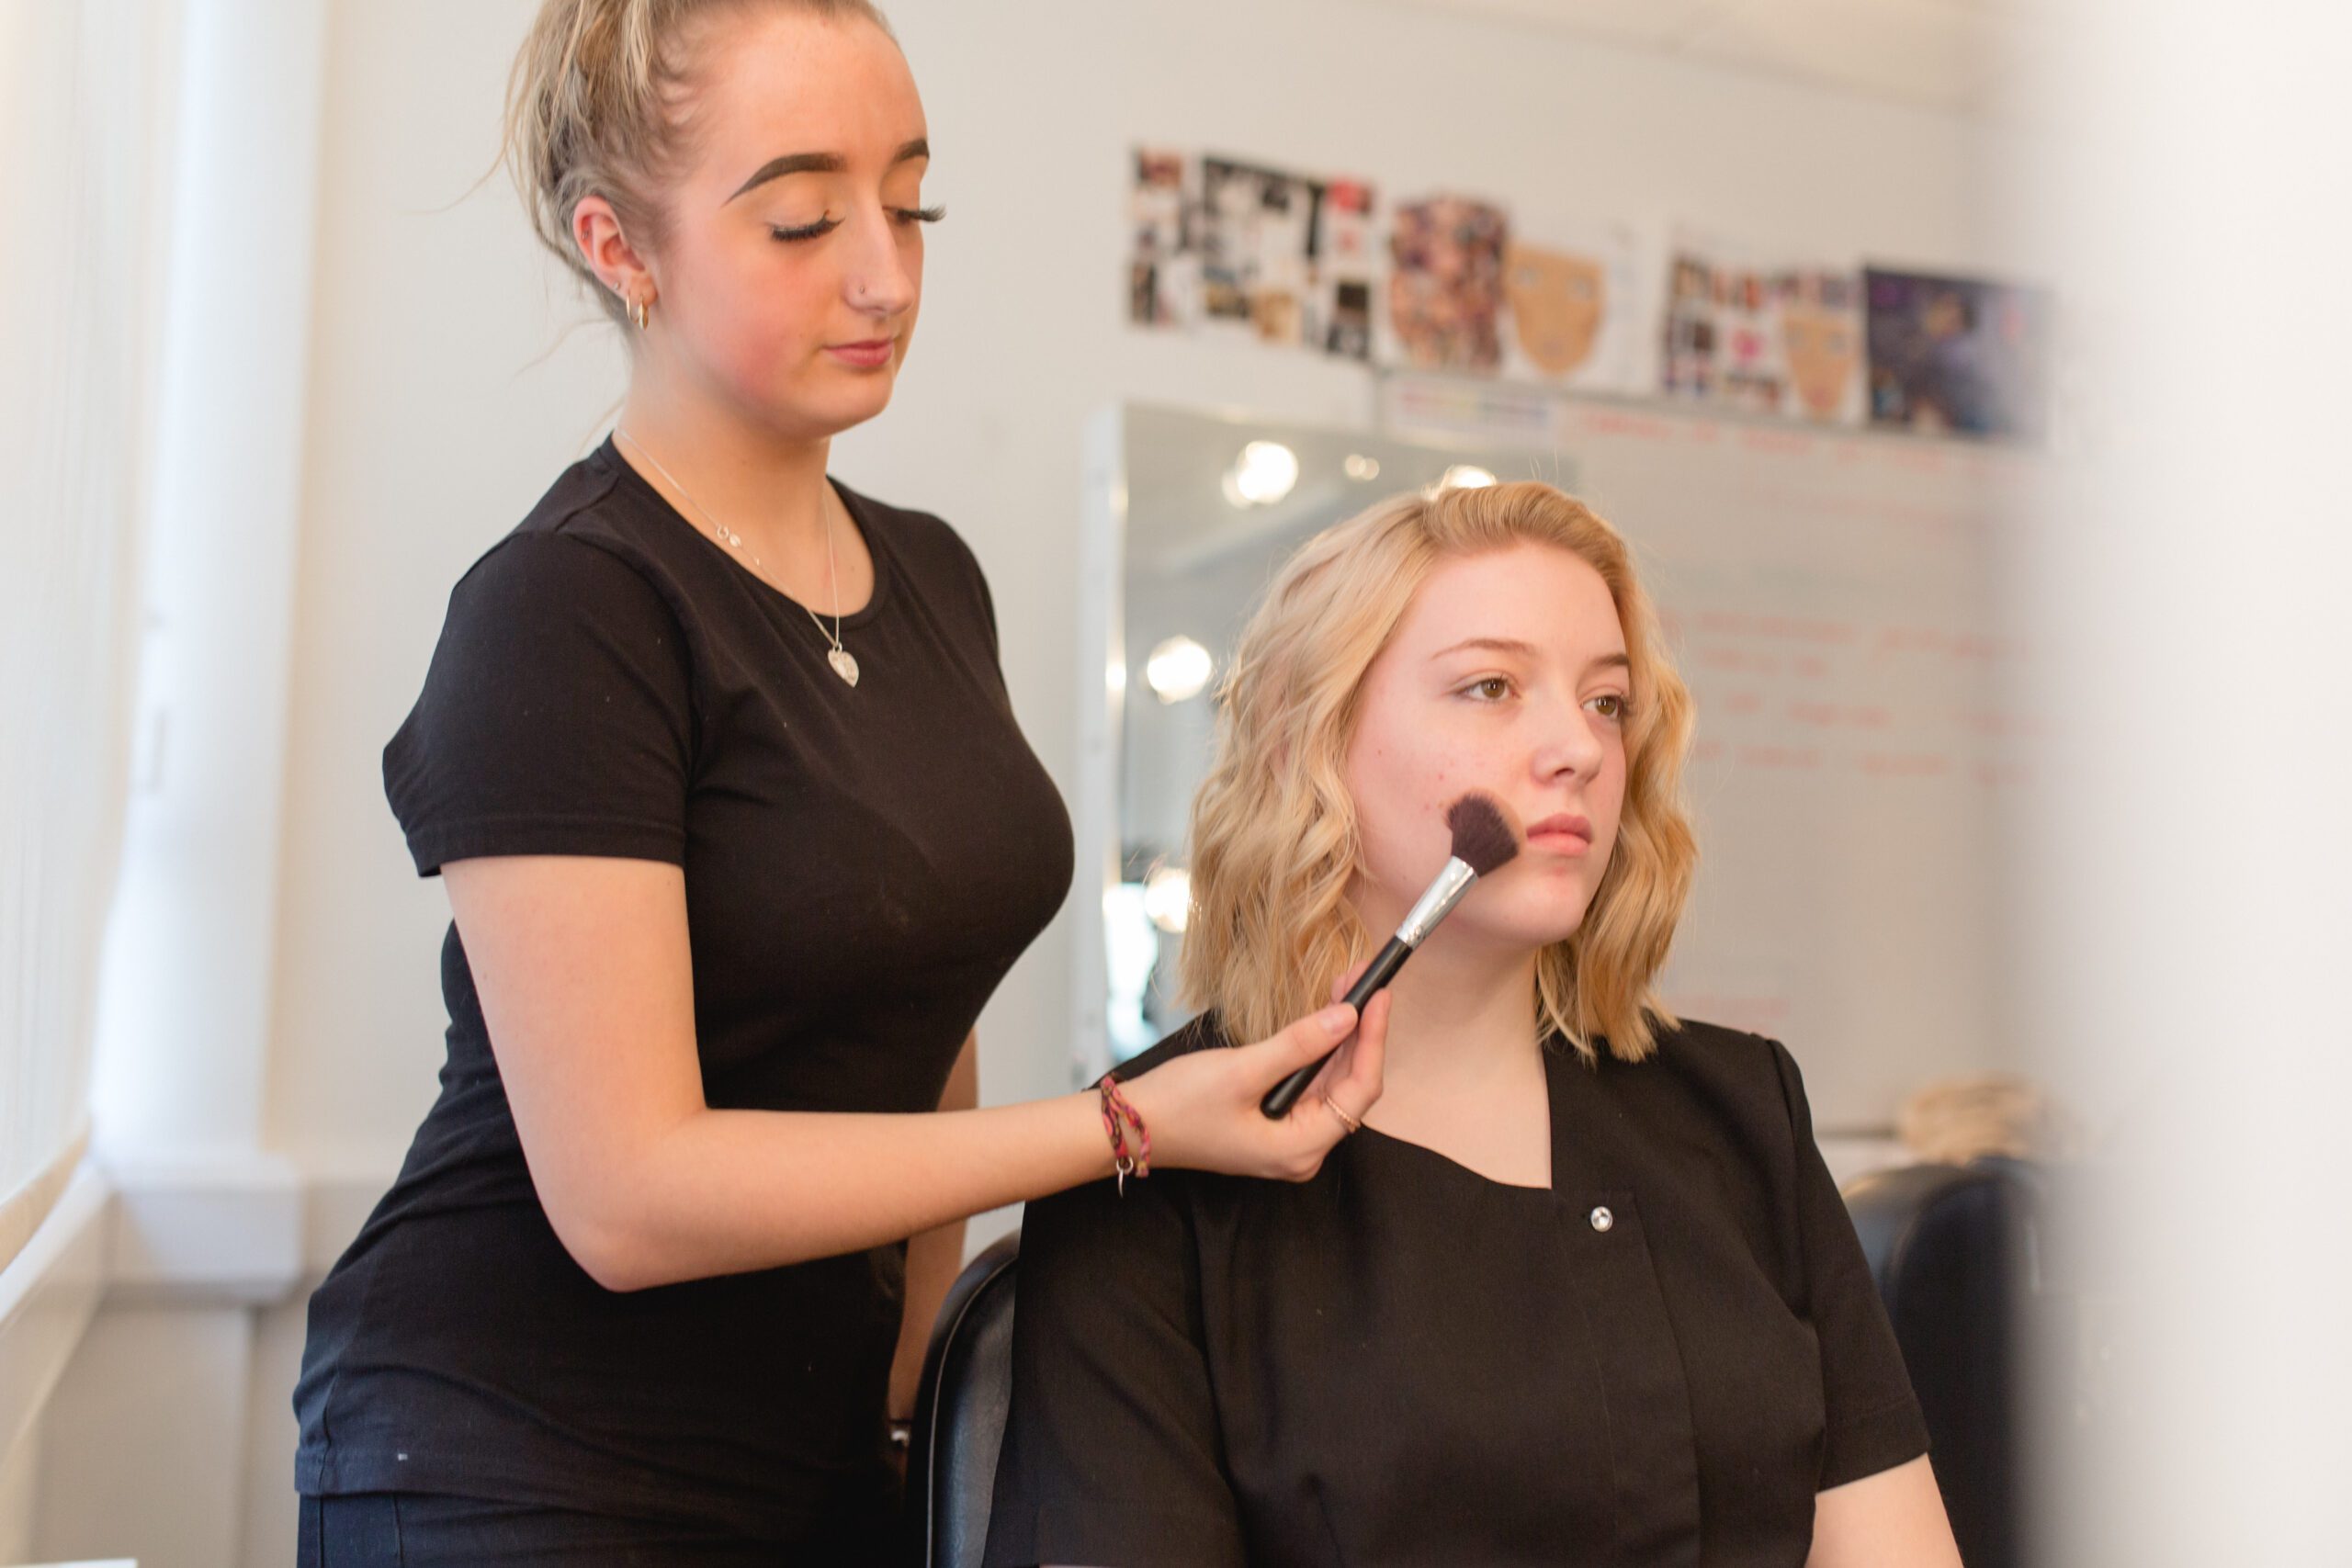 Harrogate College student applying make up to a client